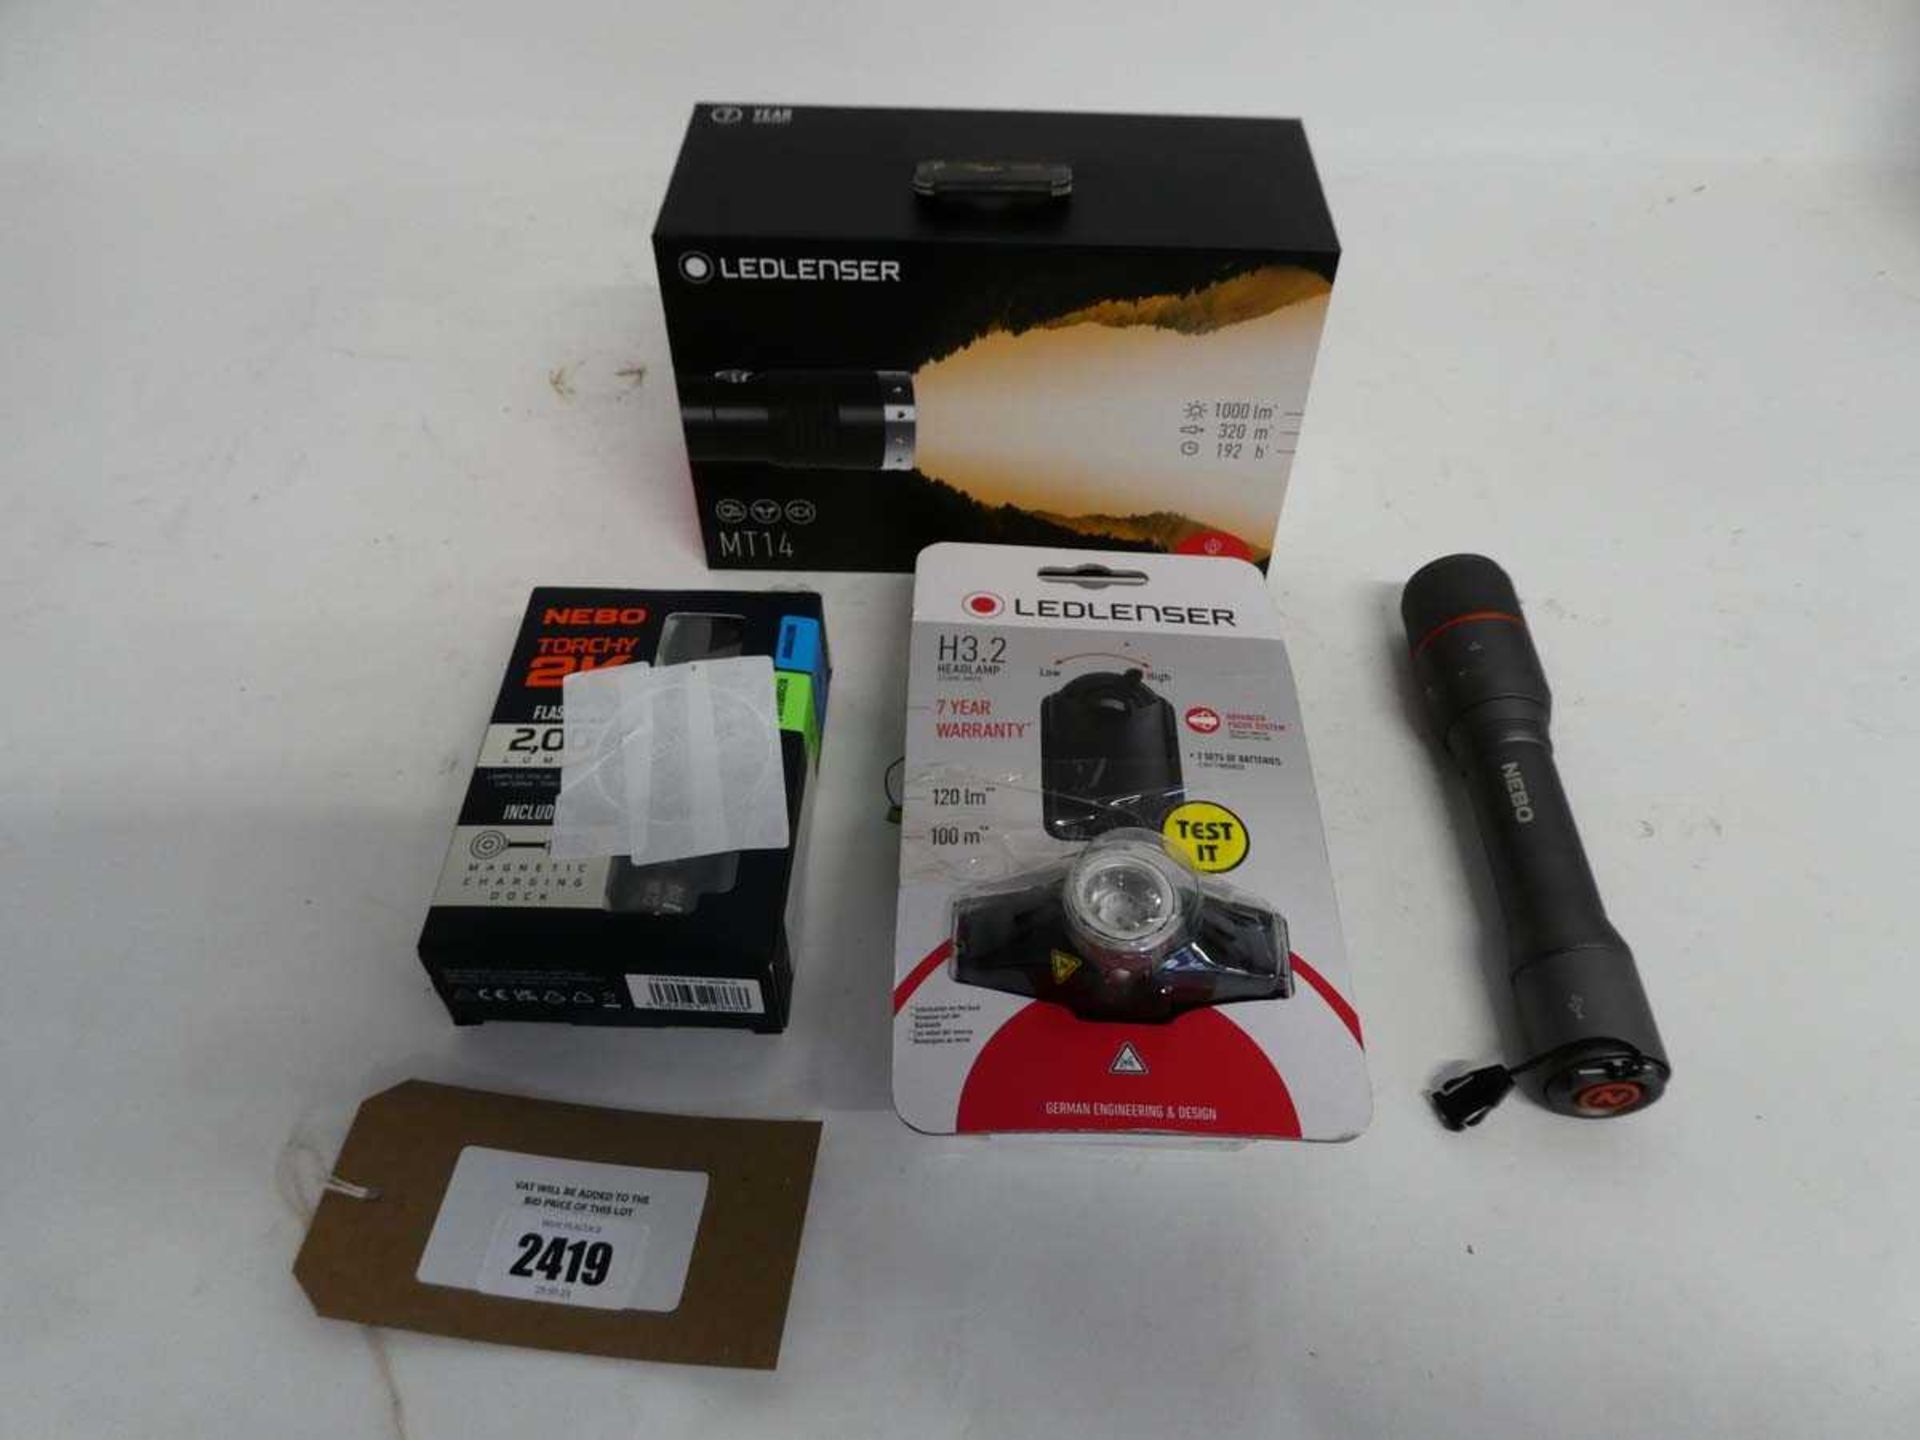 +VAT 2 LED Lenser torches incl. MT14 (boxed) and H3.2 headlamp with 2 Nebo torches